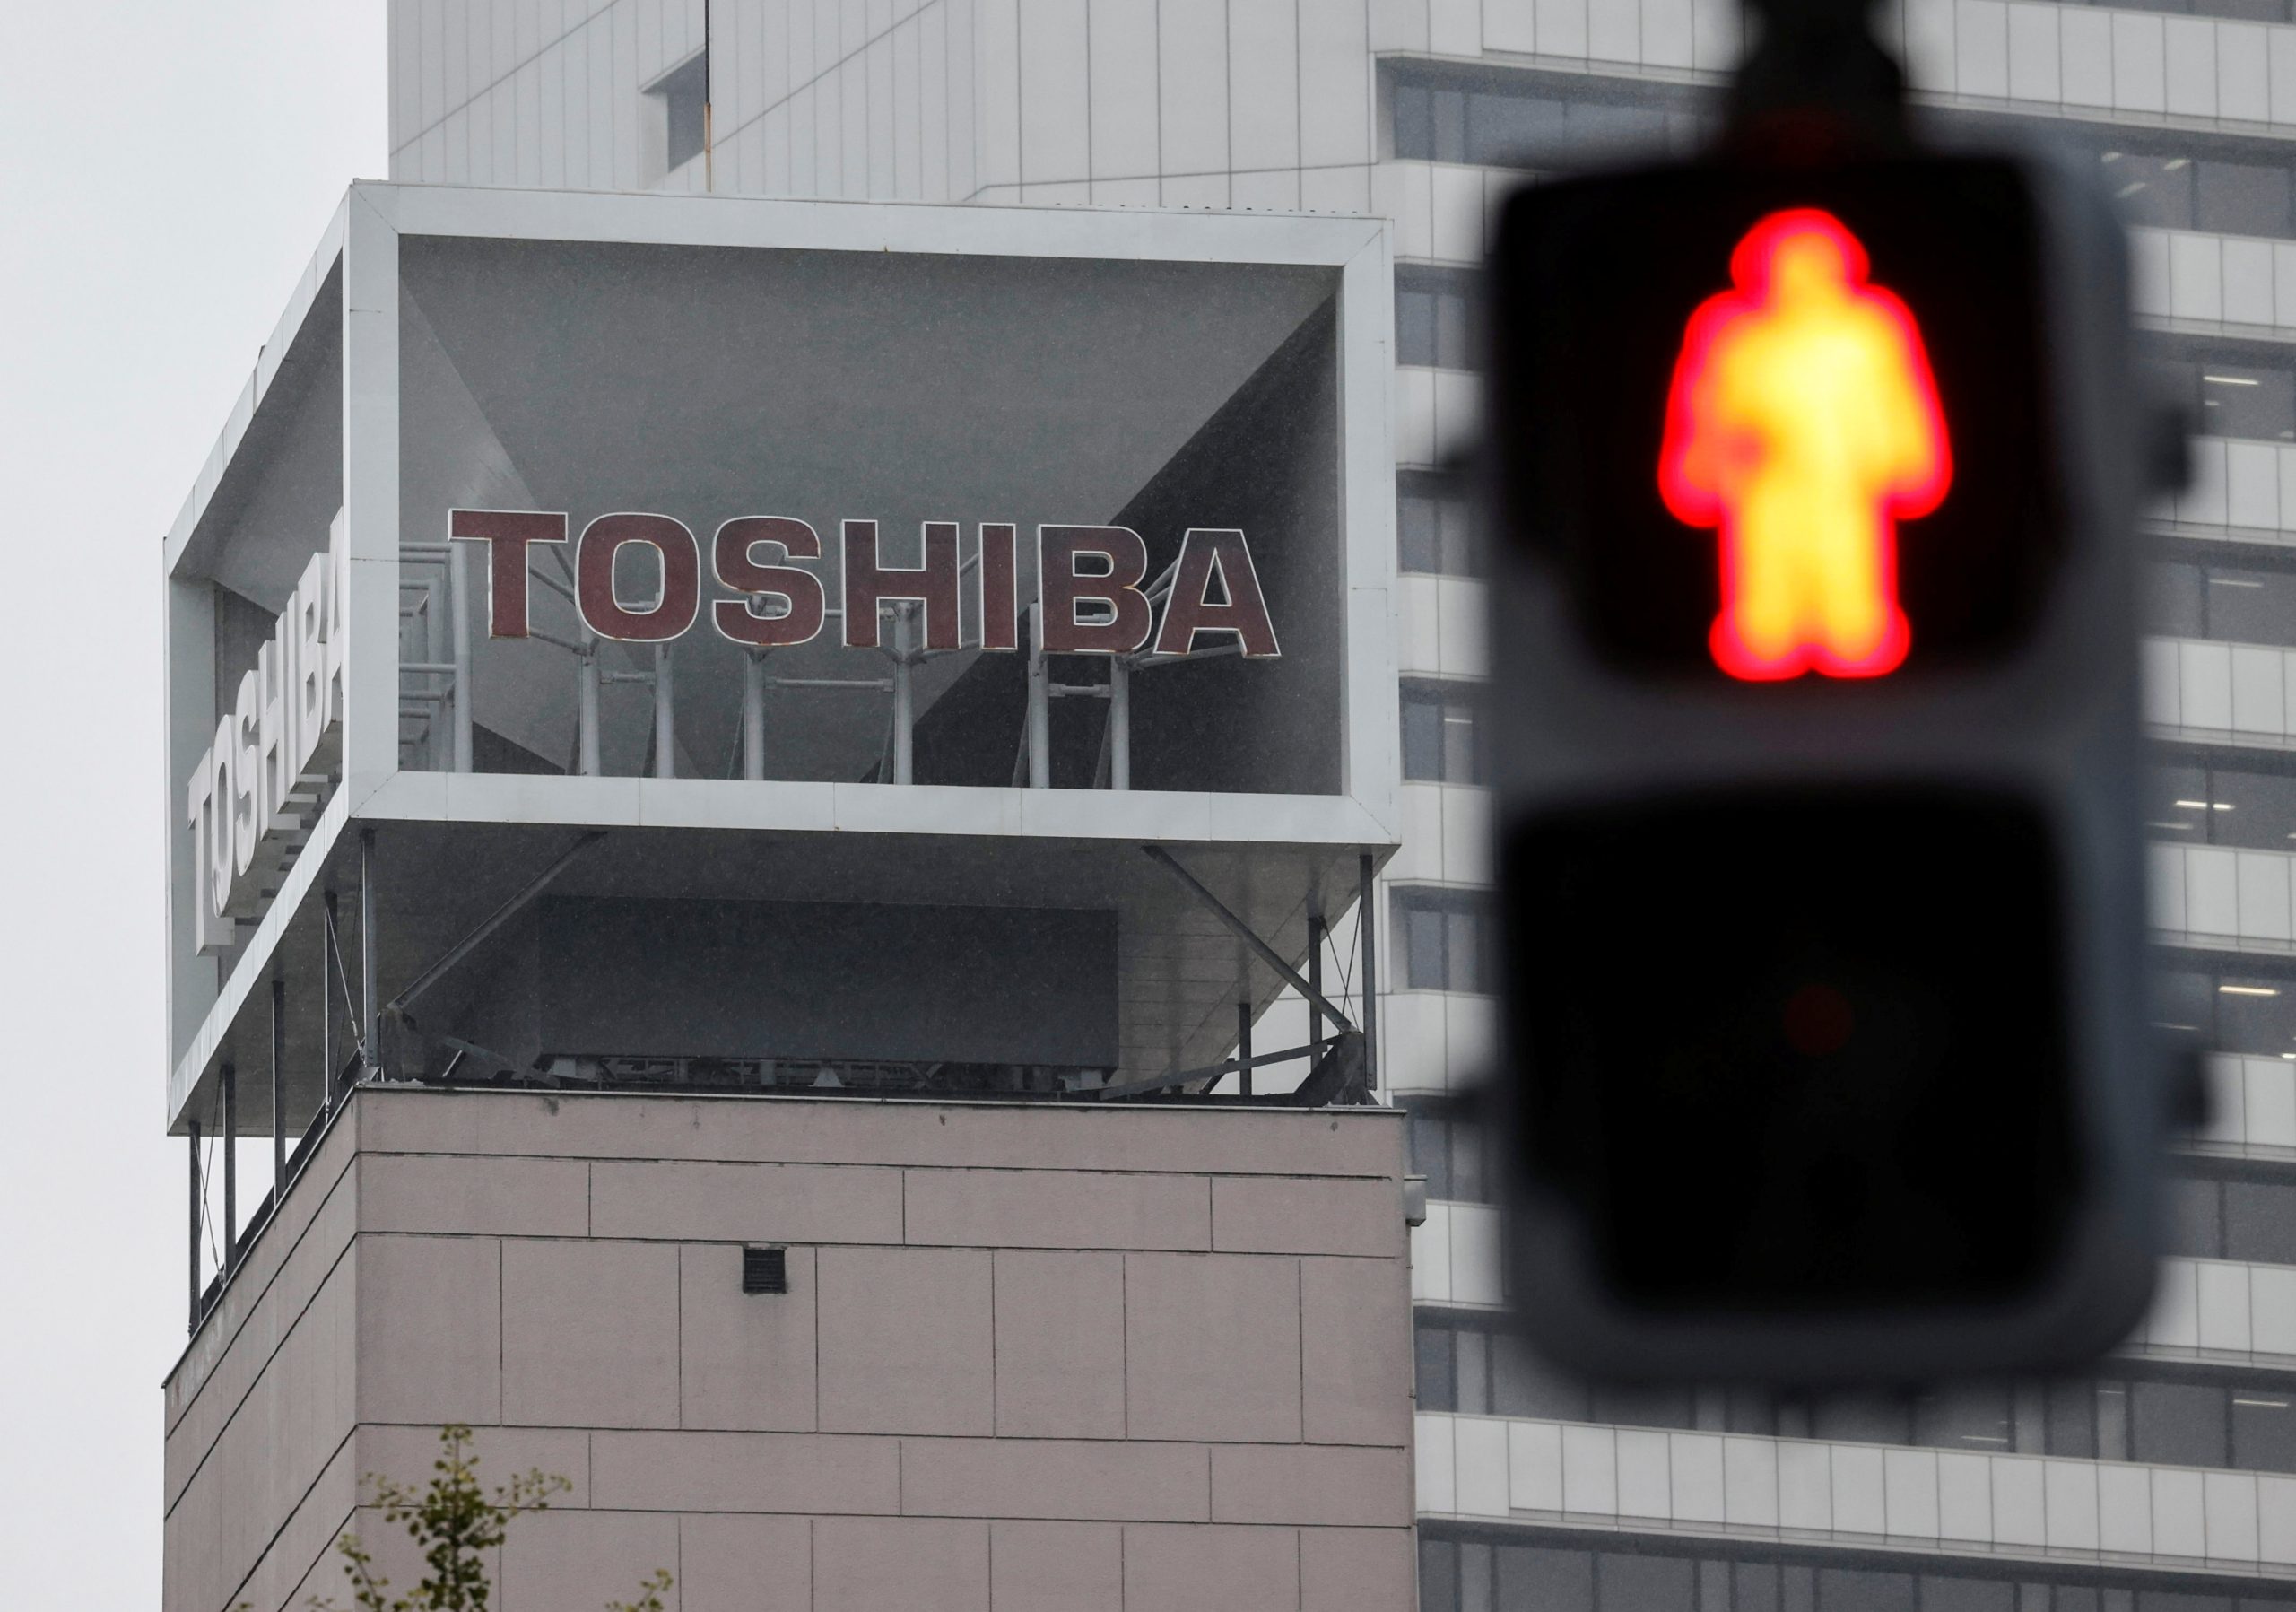  EXCLUSIVE Major Toshiba shareholder objects to break-up, urges board to solicit offers